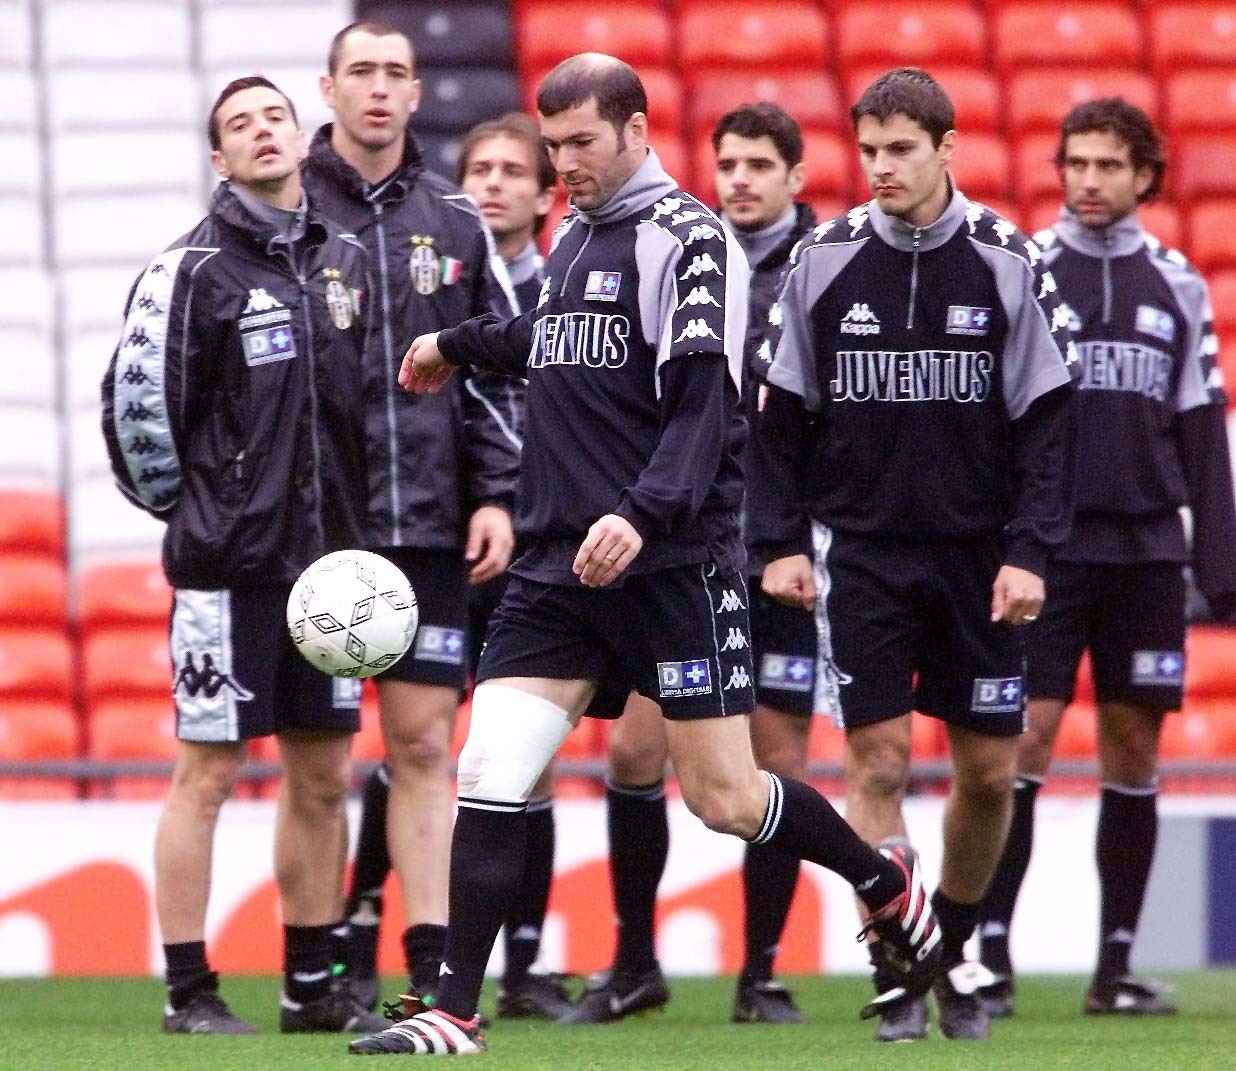 Juventus' Zinedine Zidane (front, bandaged knee) is watched by team-mates during training at Old Trafford, in preparation for their UEFA Champions League Semi-Final first-leg football match against Manchester United